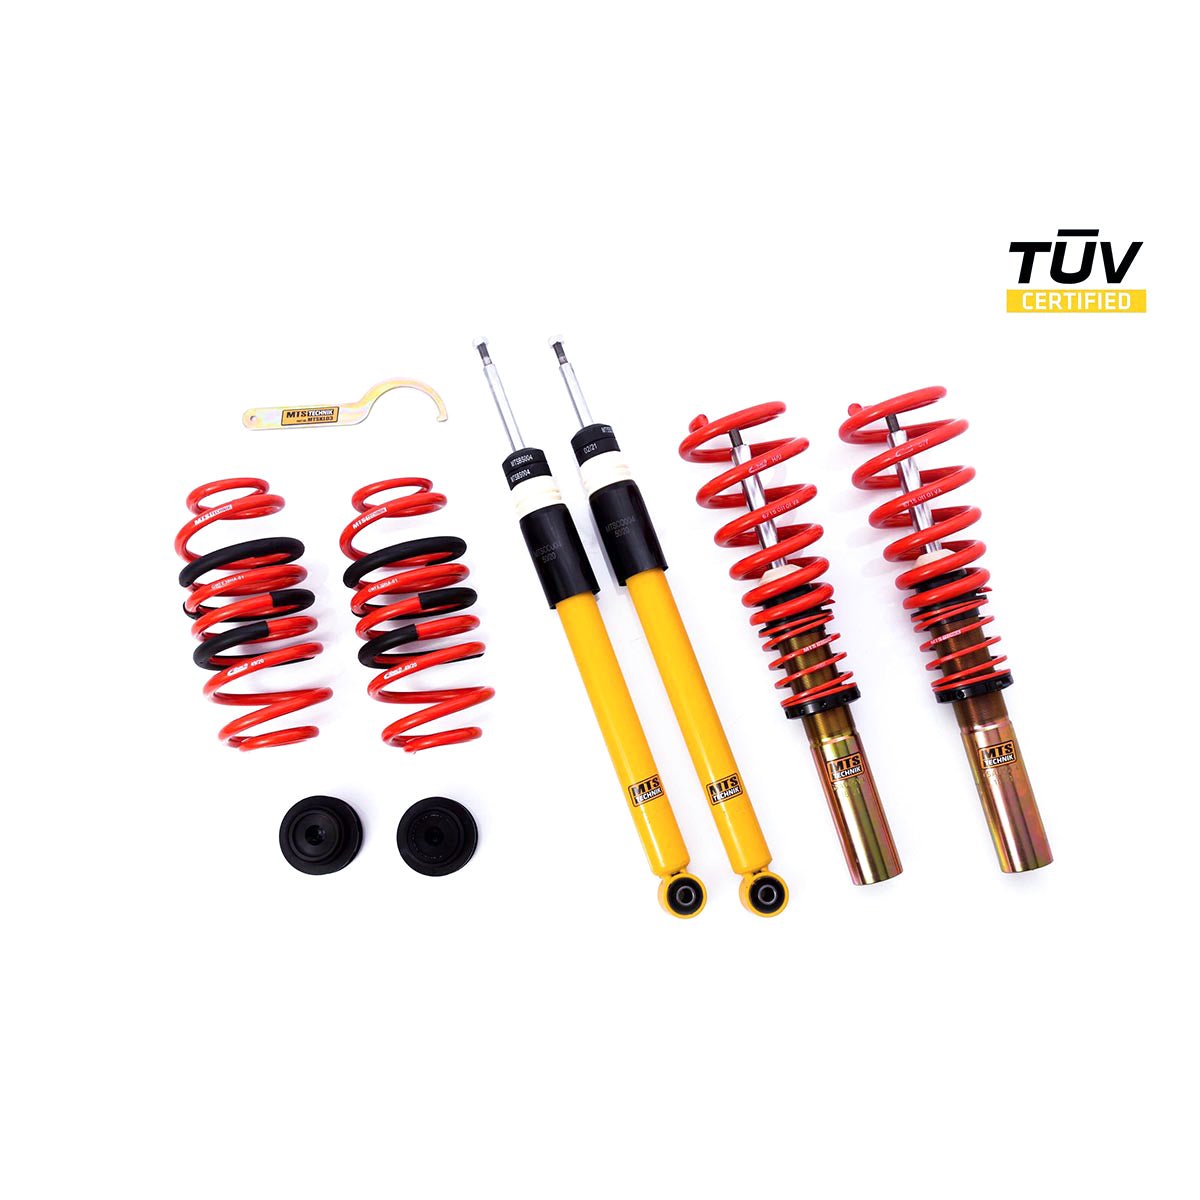 MTS TECHNIK coilover kit Street Audi A5 B8 Coupe - PARTS33 GmbH